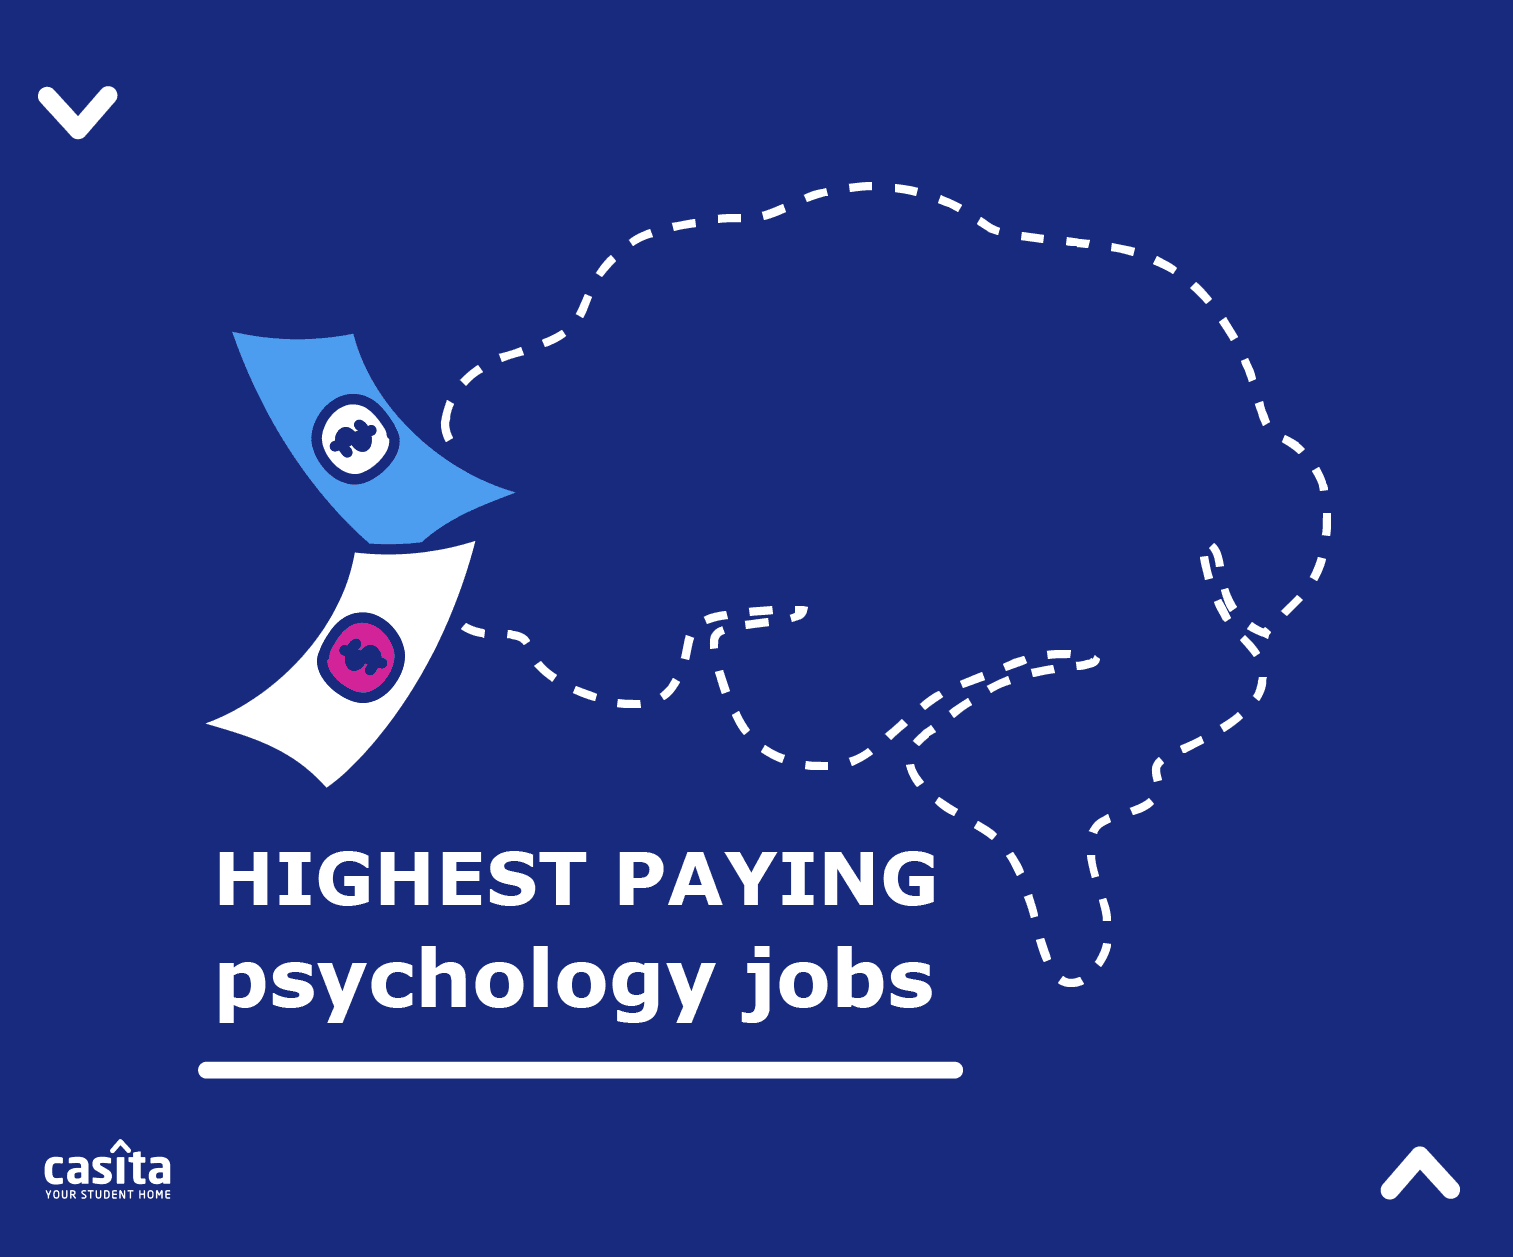 What Are the Highest Paying Psychology Jobs?